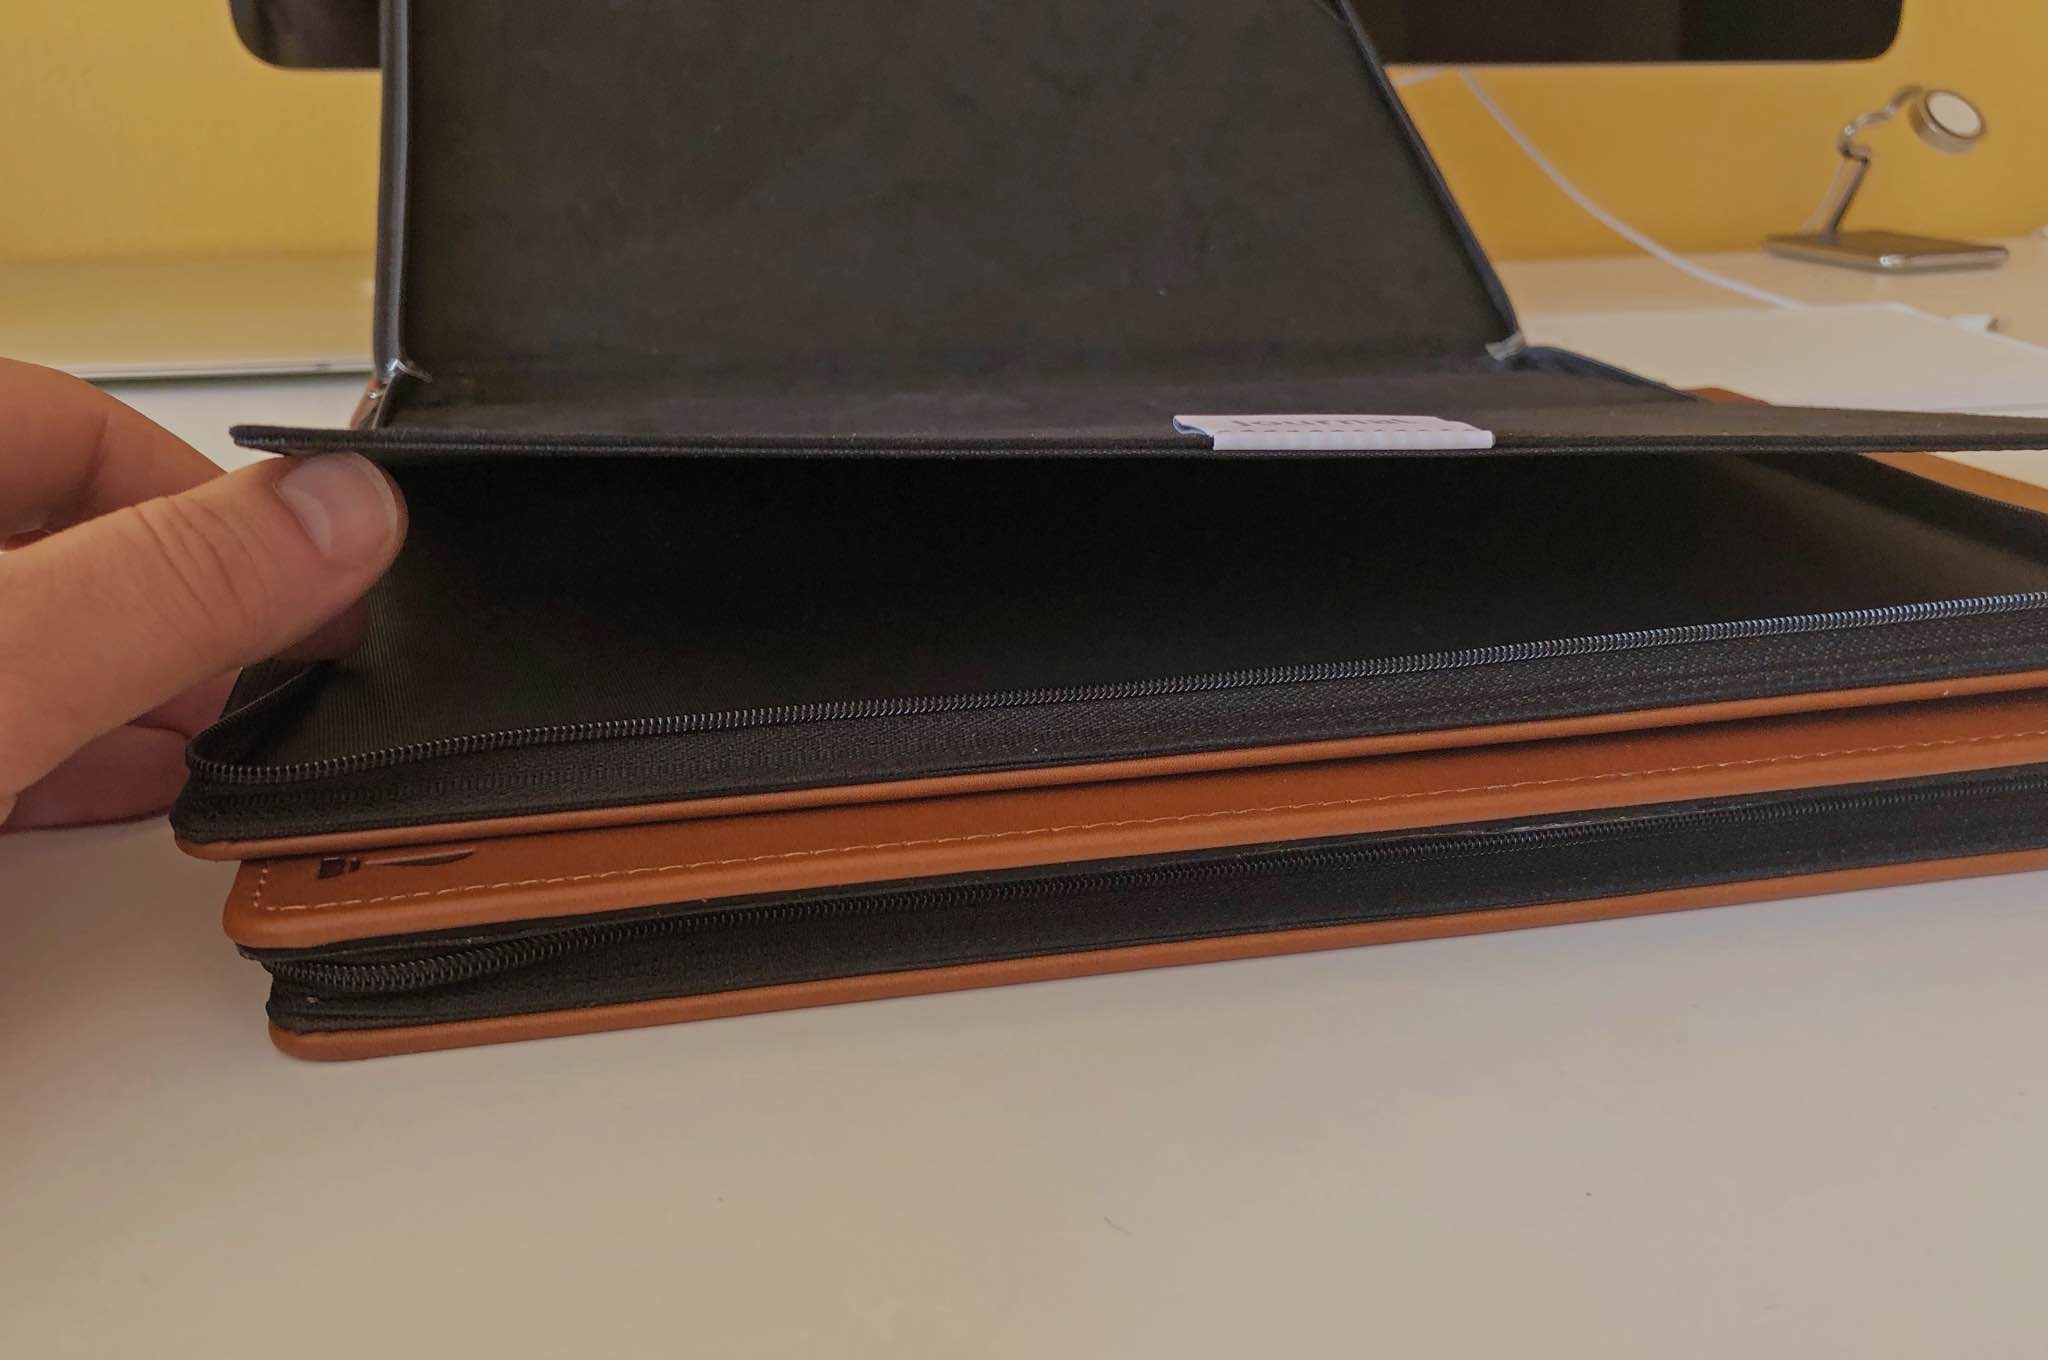 Twelve South's leather cases for MacBooks feature a hidden pocket for paperwork